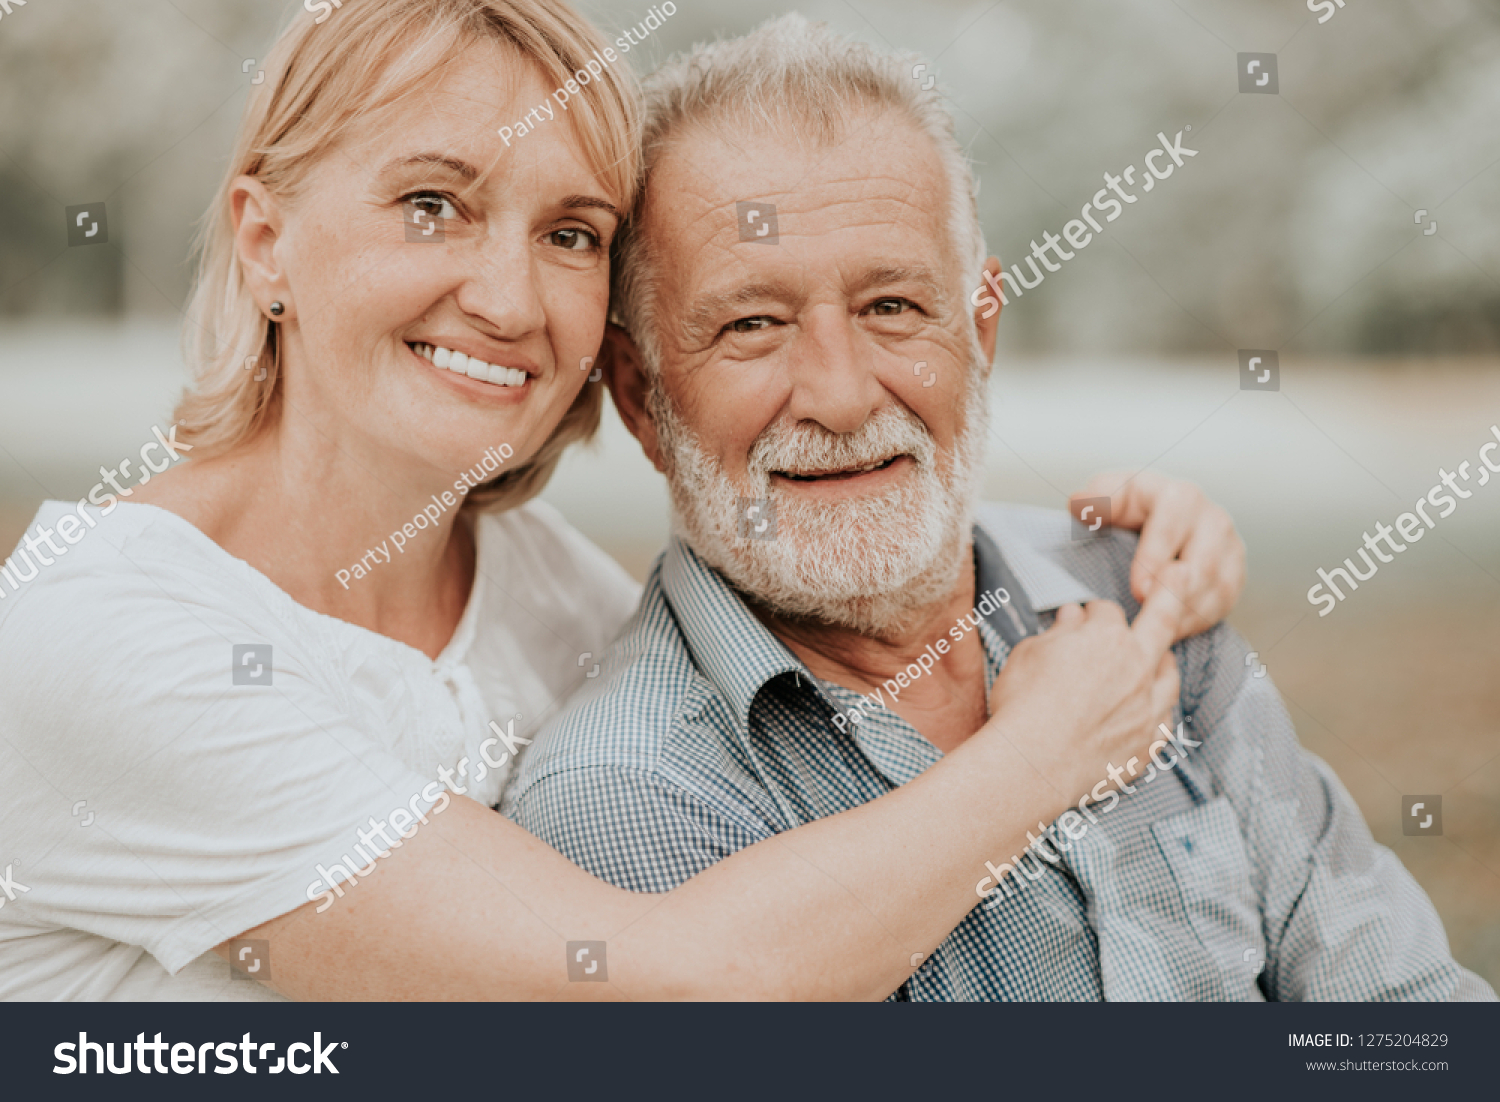 Lifestyle Senior Couple Happy and Relaxed . Good Healthy Elderly in Park Nature. Portrait Senior Retirement, Older Couple Enjoy Vacation Autumn. Celebrated Lover Valentine Day. #1275204829